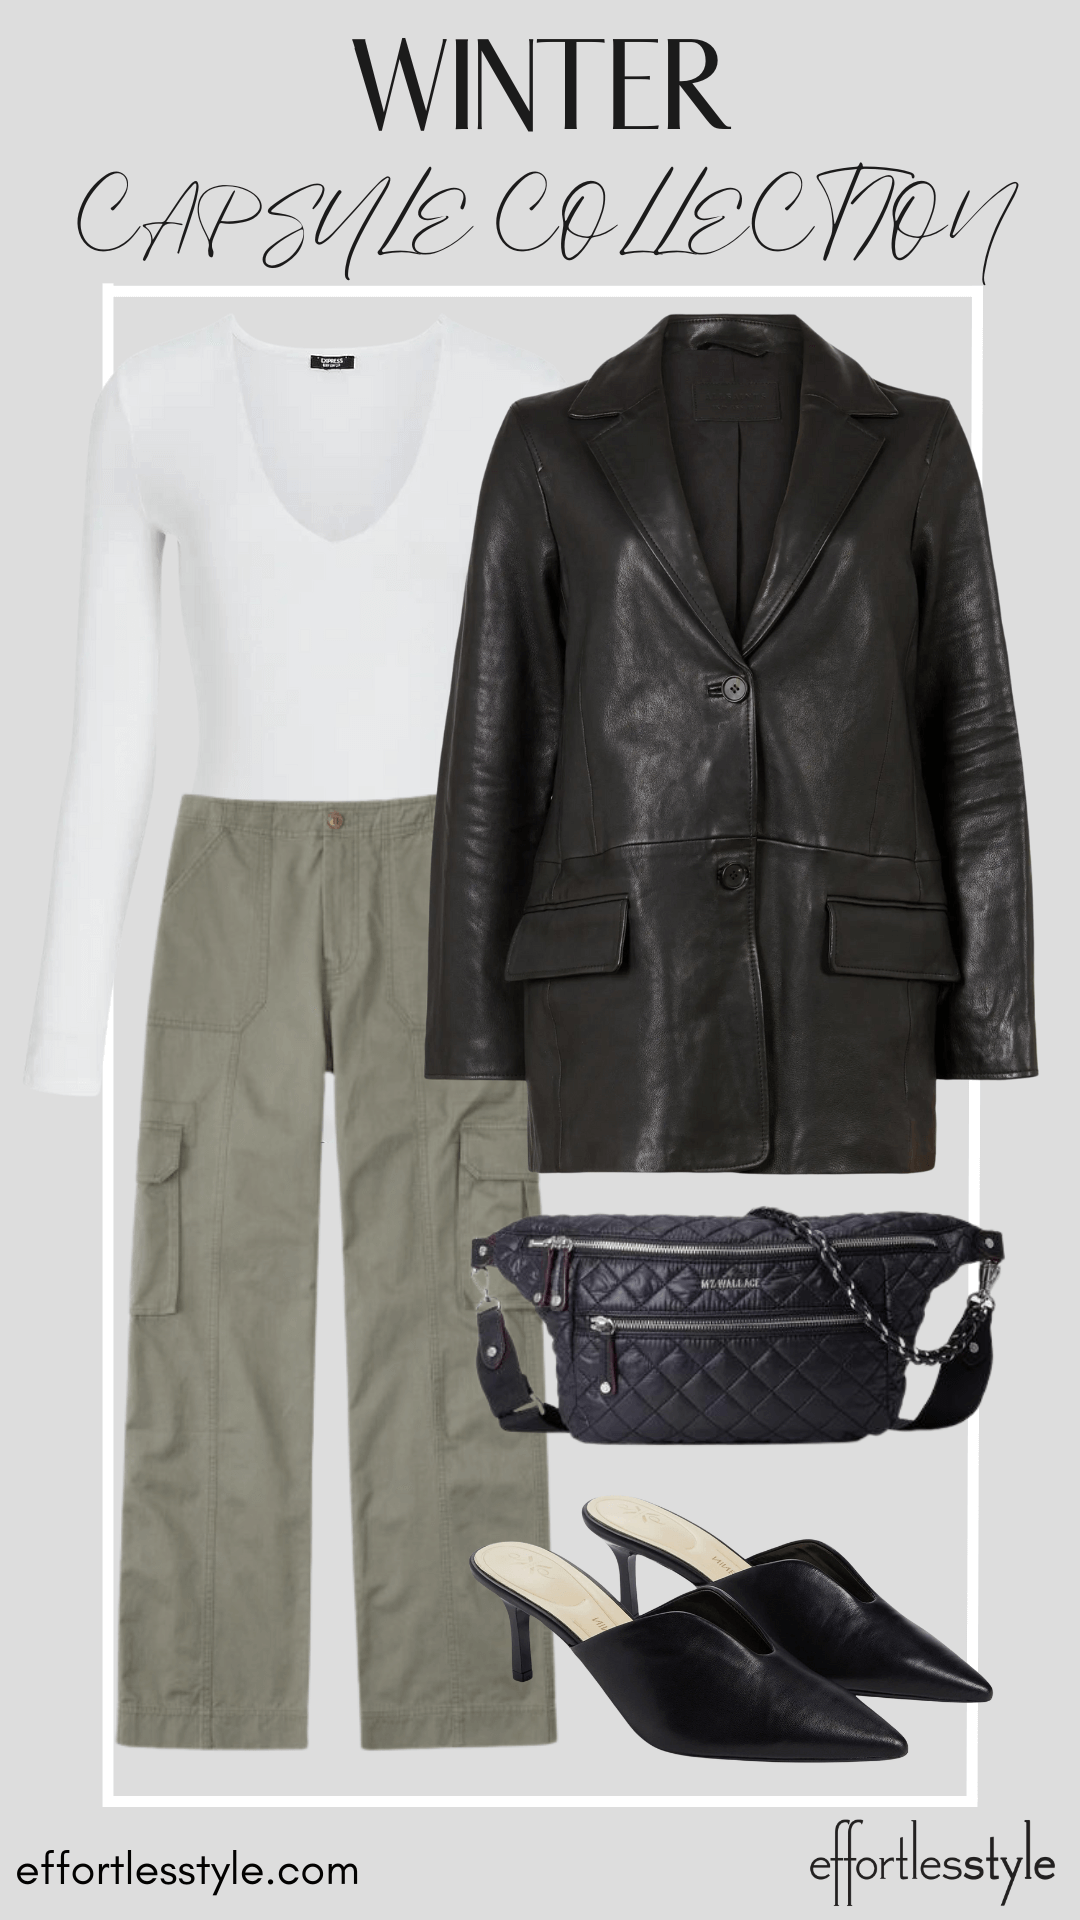 How To Wear Our Winter Capsule Wardrobe - Part 1 Leather Blazer & White Bodysuit & Cargo Pants how to dress your cargo pants up how to wear a blazer with cargo pants how to wear heels with cargo pants